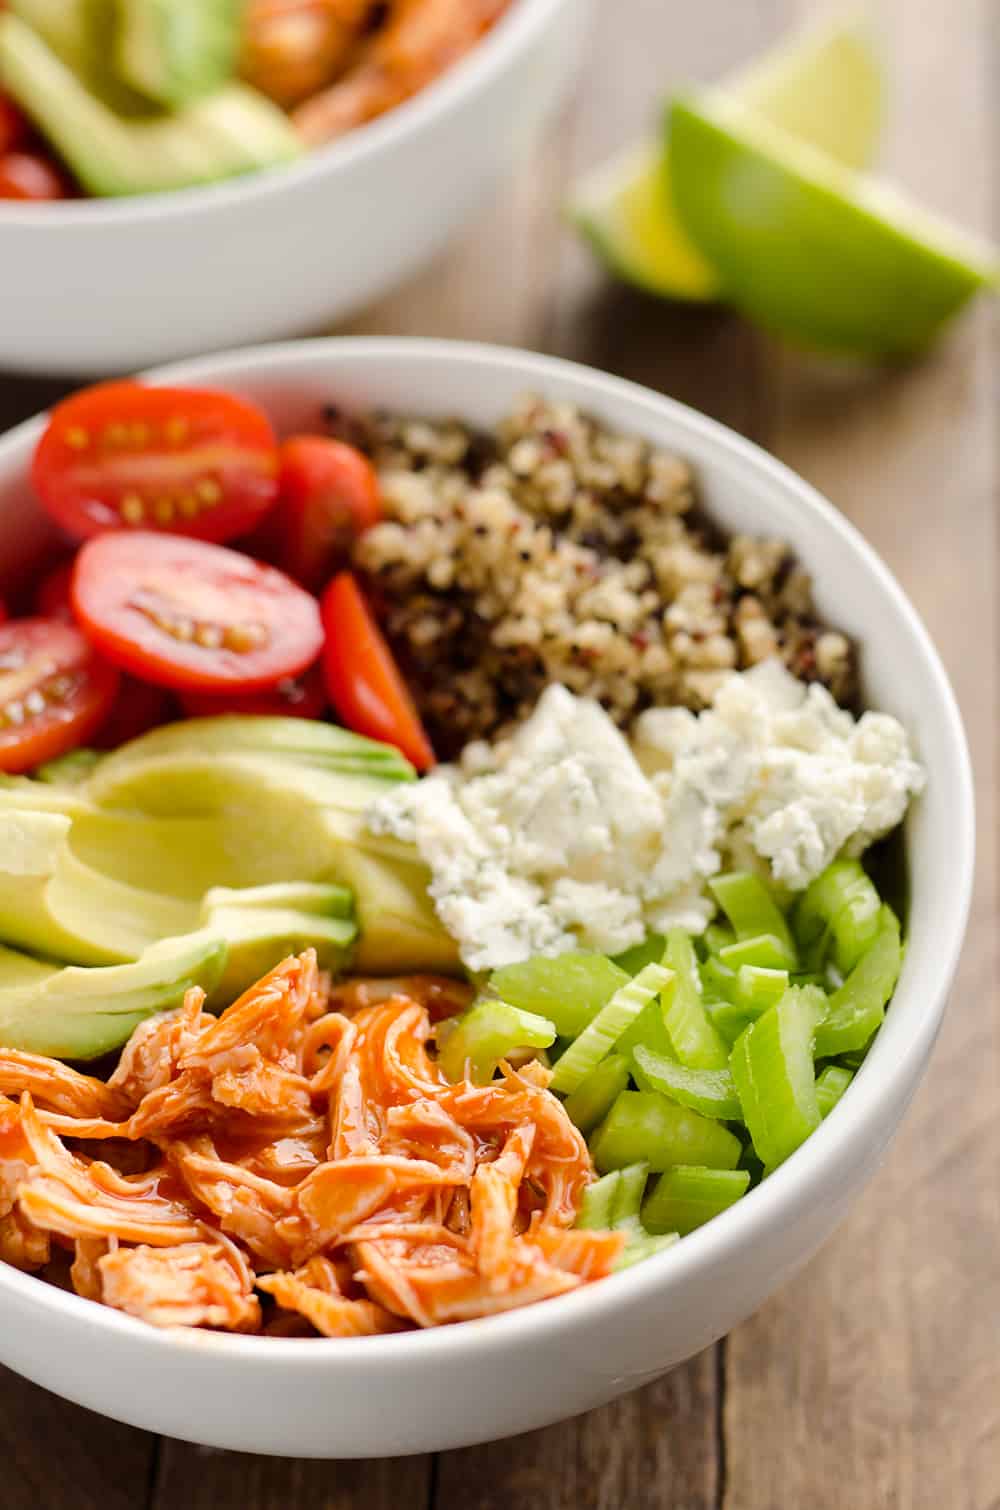 Buffalo Chicken & Quinoa Veggie Bowls are a light and healthy dinner recipe loaded with wholesome vegetables and grains, shredded chicken tossed in spicy buffalo sauce and bleu cheese crumbles for amazing flavor!